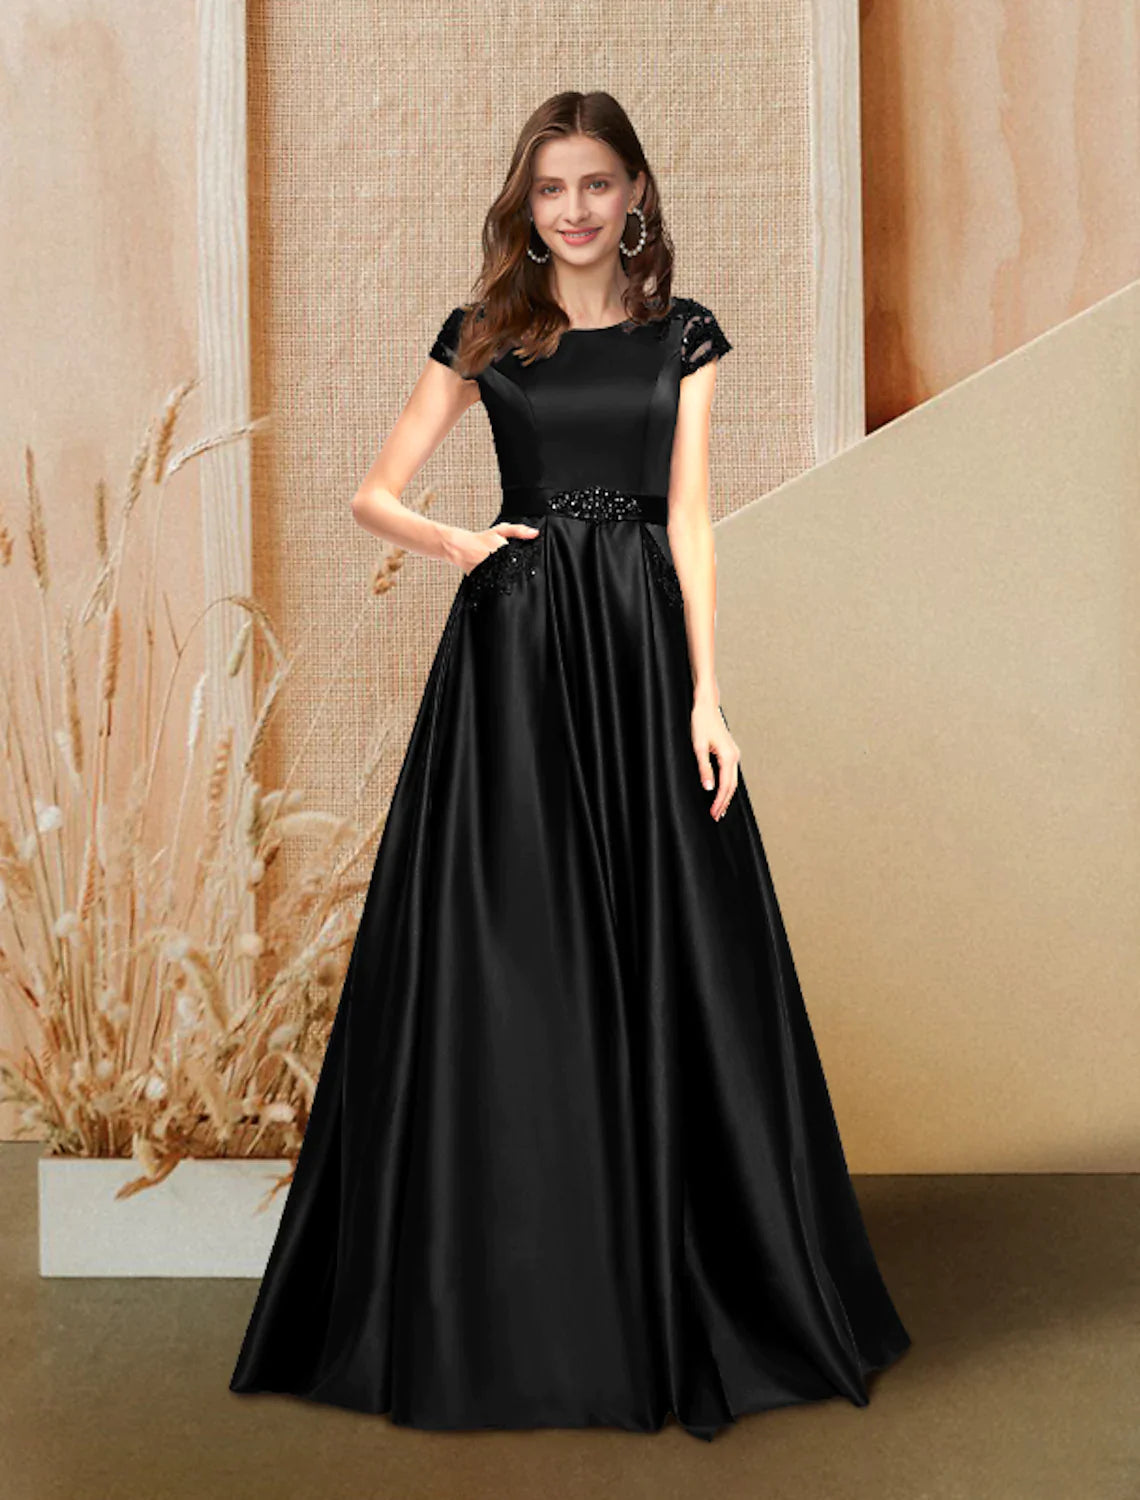 A-Line Evening Gown Luxurious Dress Wedding Guest Floor Length Short Sleeve Jewel Neck Pocket Satin with Beading Lace Insert Pocket